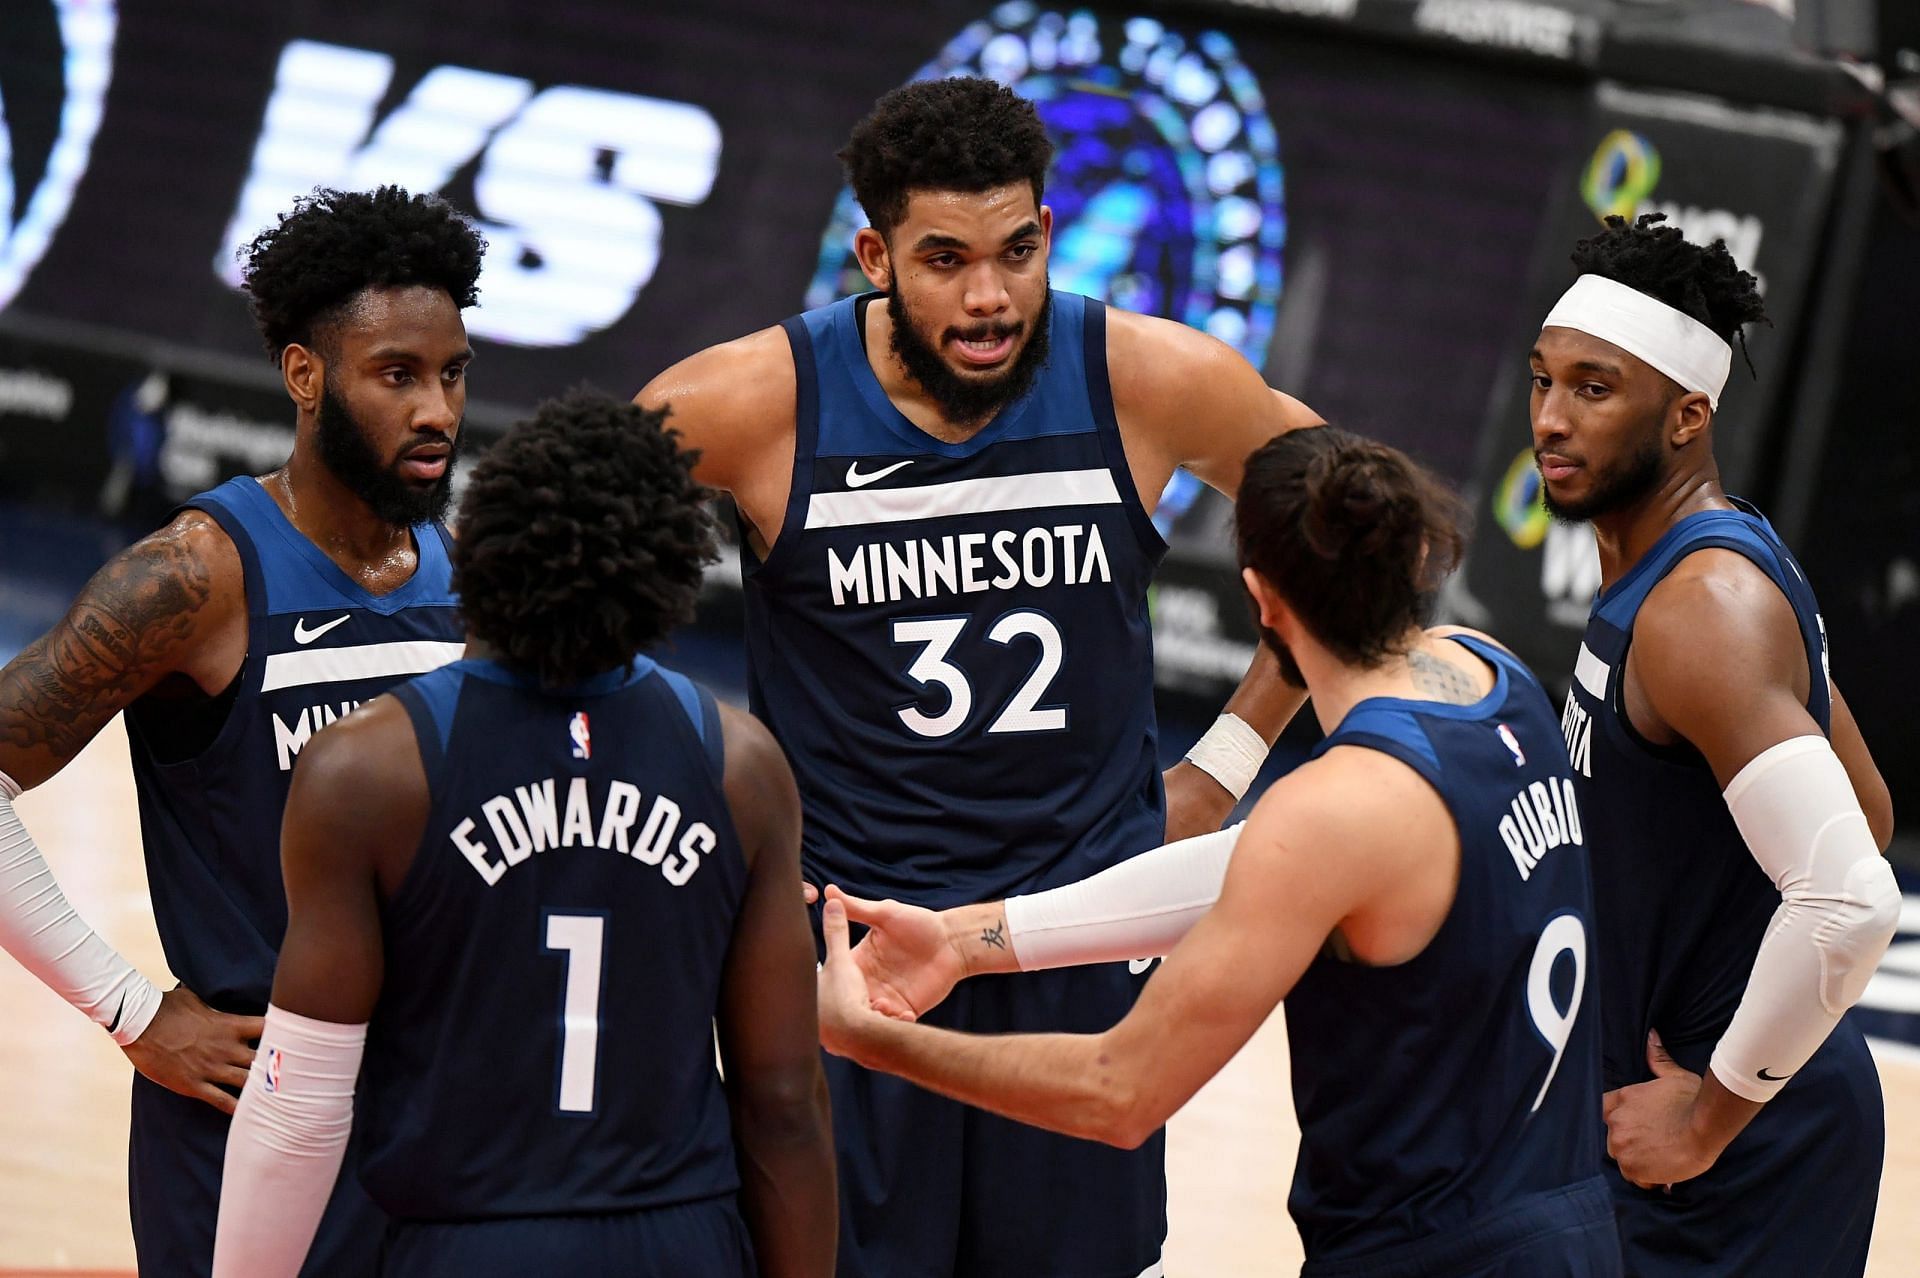 The Minnesota Timberwolves are hoping to show the same effort and focus in their game against the streaking Los Angeles Clippers. [Photo: Dunkingwiththewolves.com]